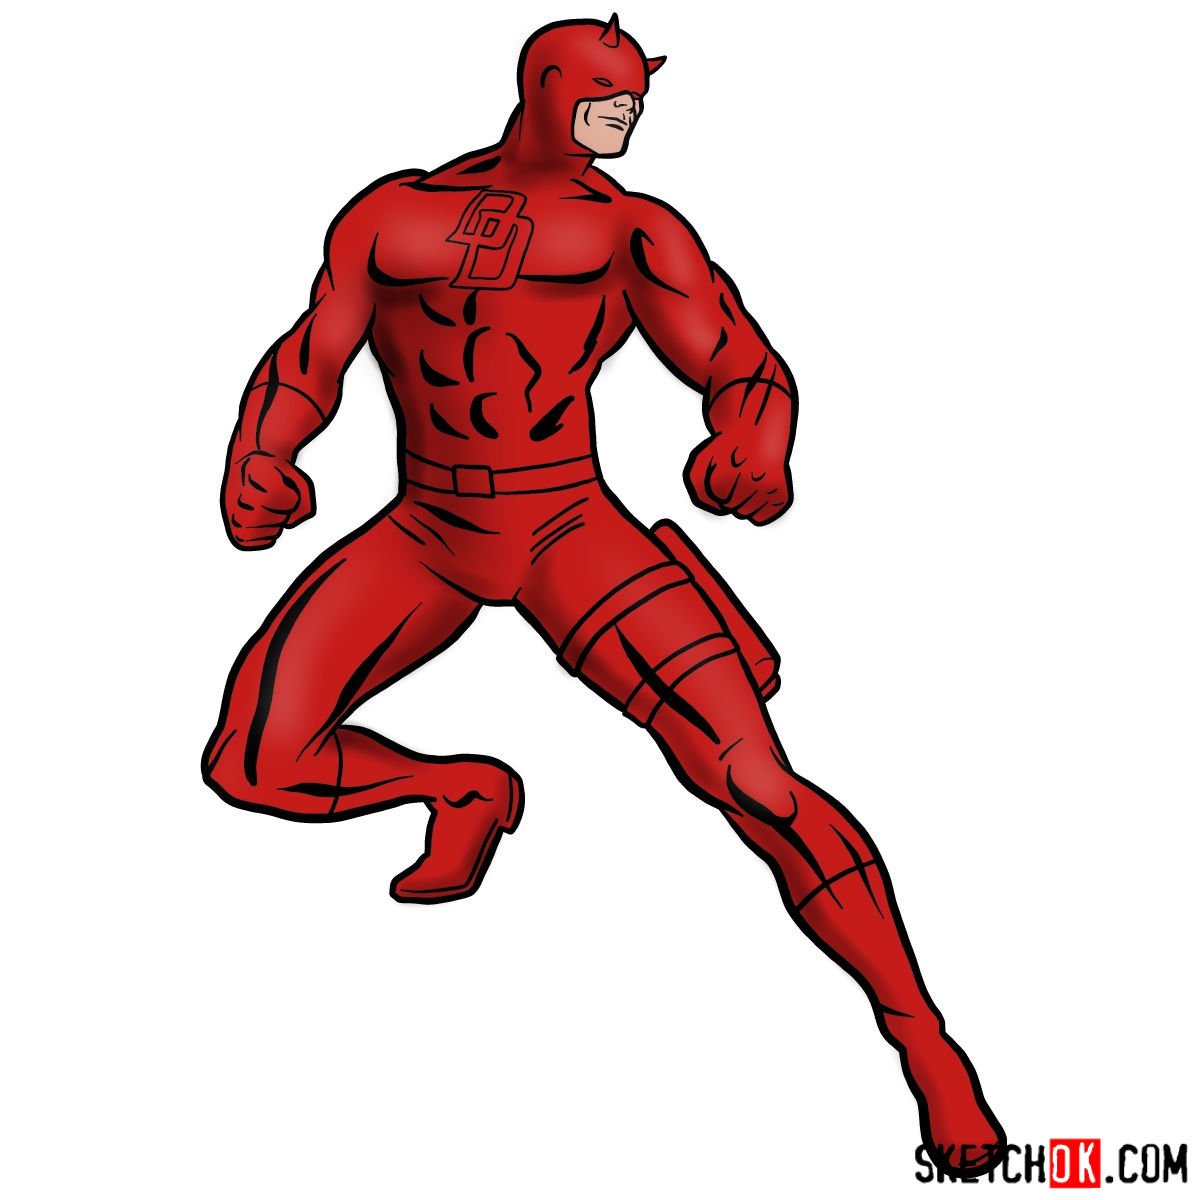 How to draw Daredevil from Marvel